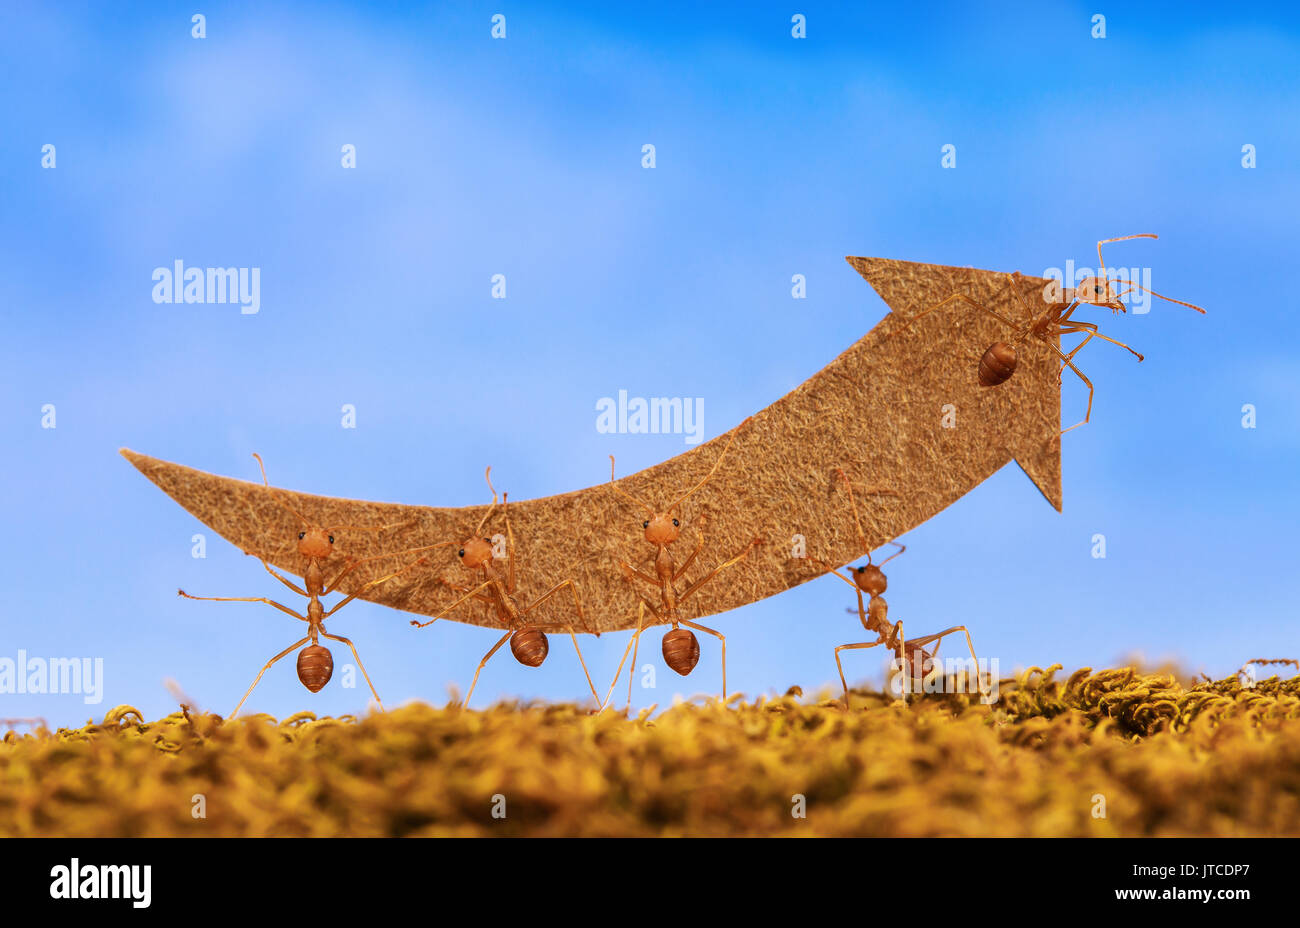 Ants carry rising arrow for business graph, business and teamwork concept Stock Photo